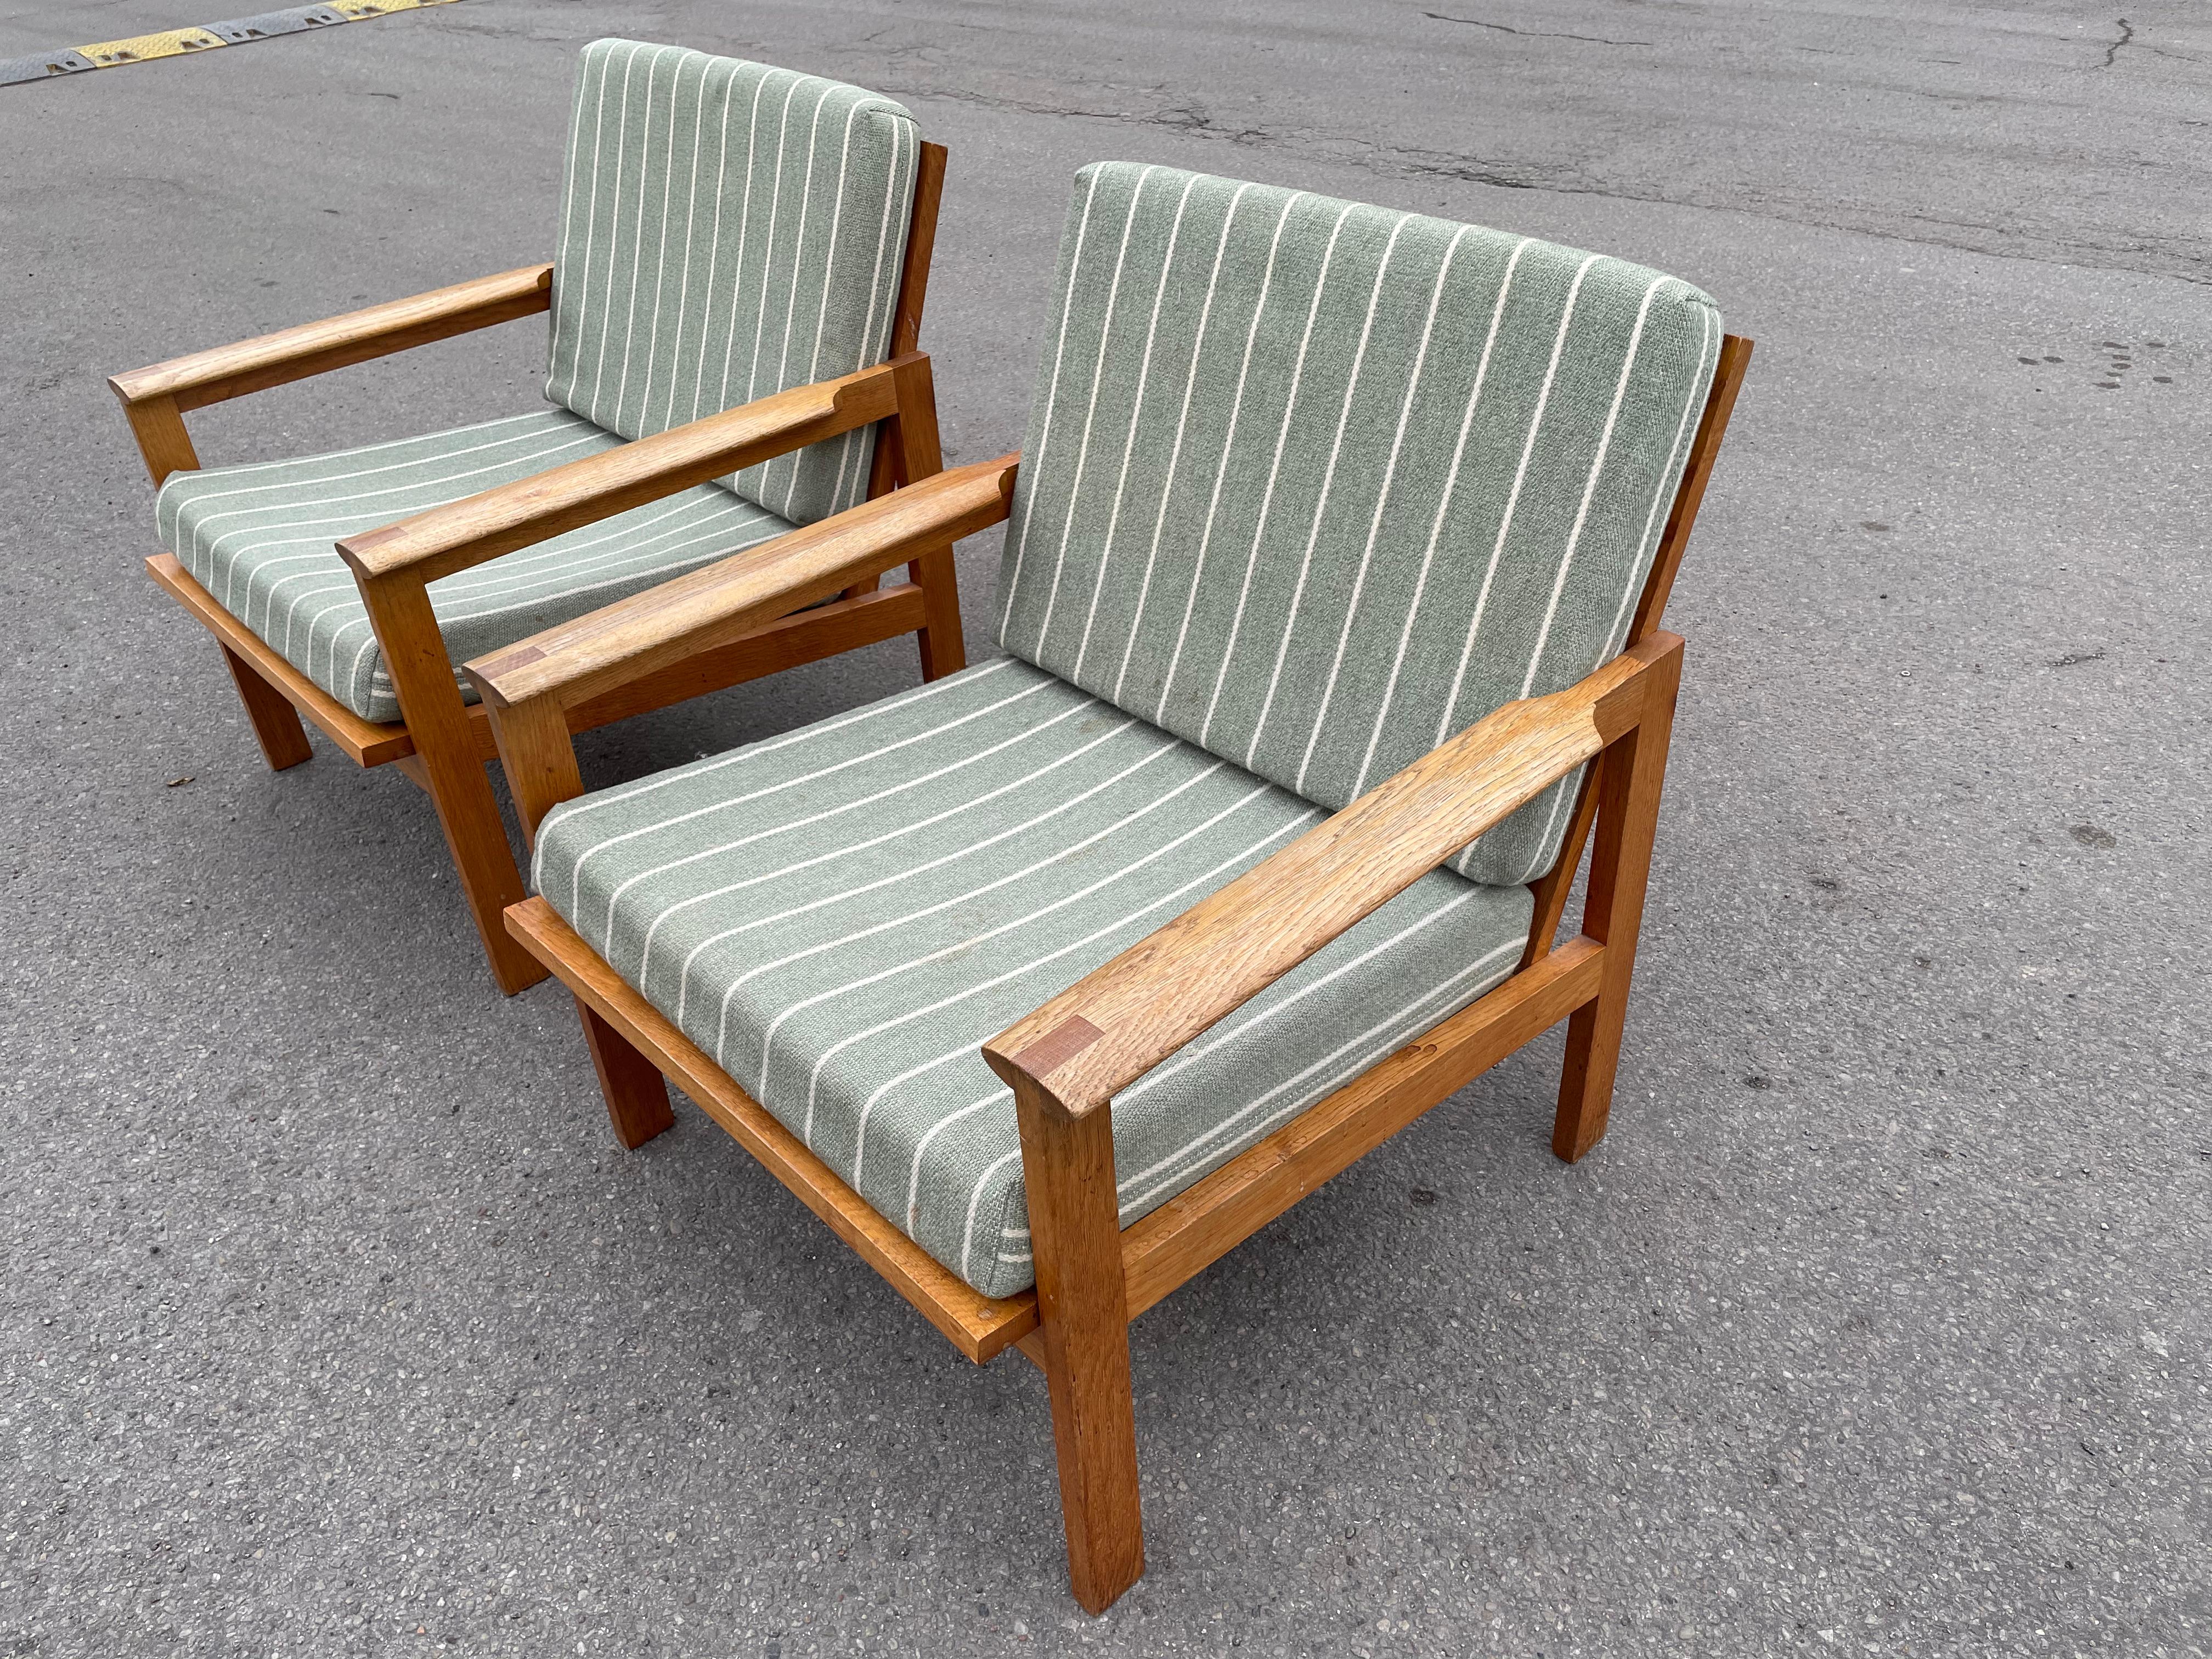 Pair of midcentury armchairs designed by Illum Wikkelsø, produced by Niels Eilersen in Denmark, designed in 1959, oak frames with loose cushions in original upholstery.